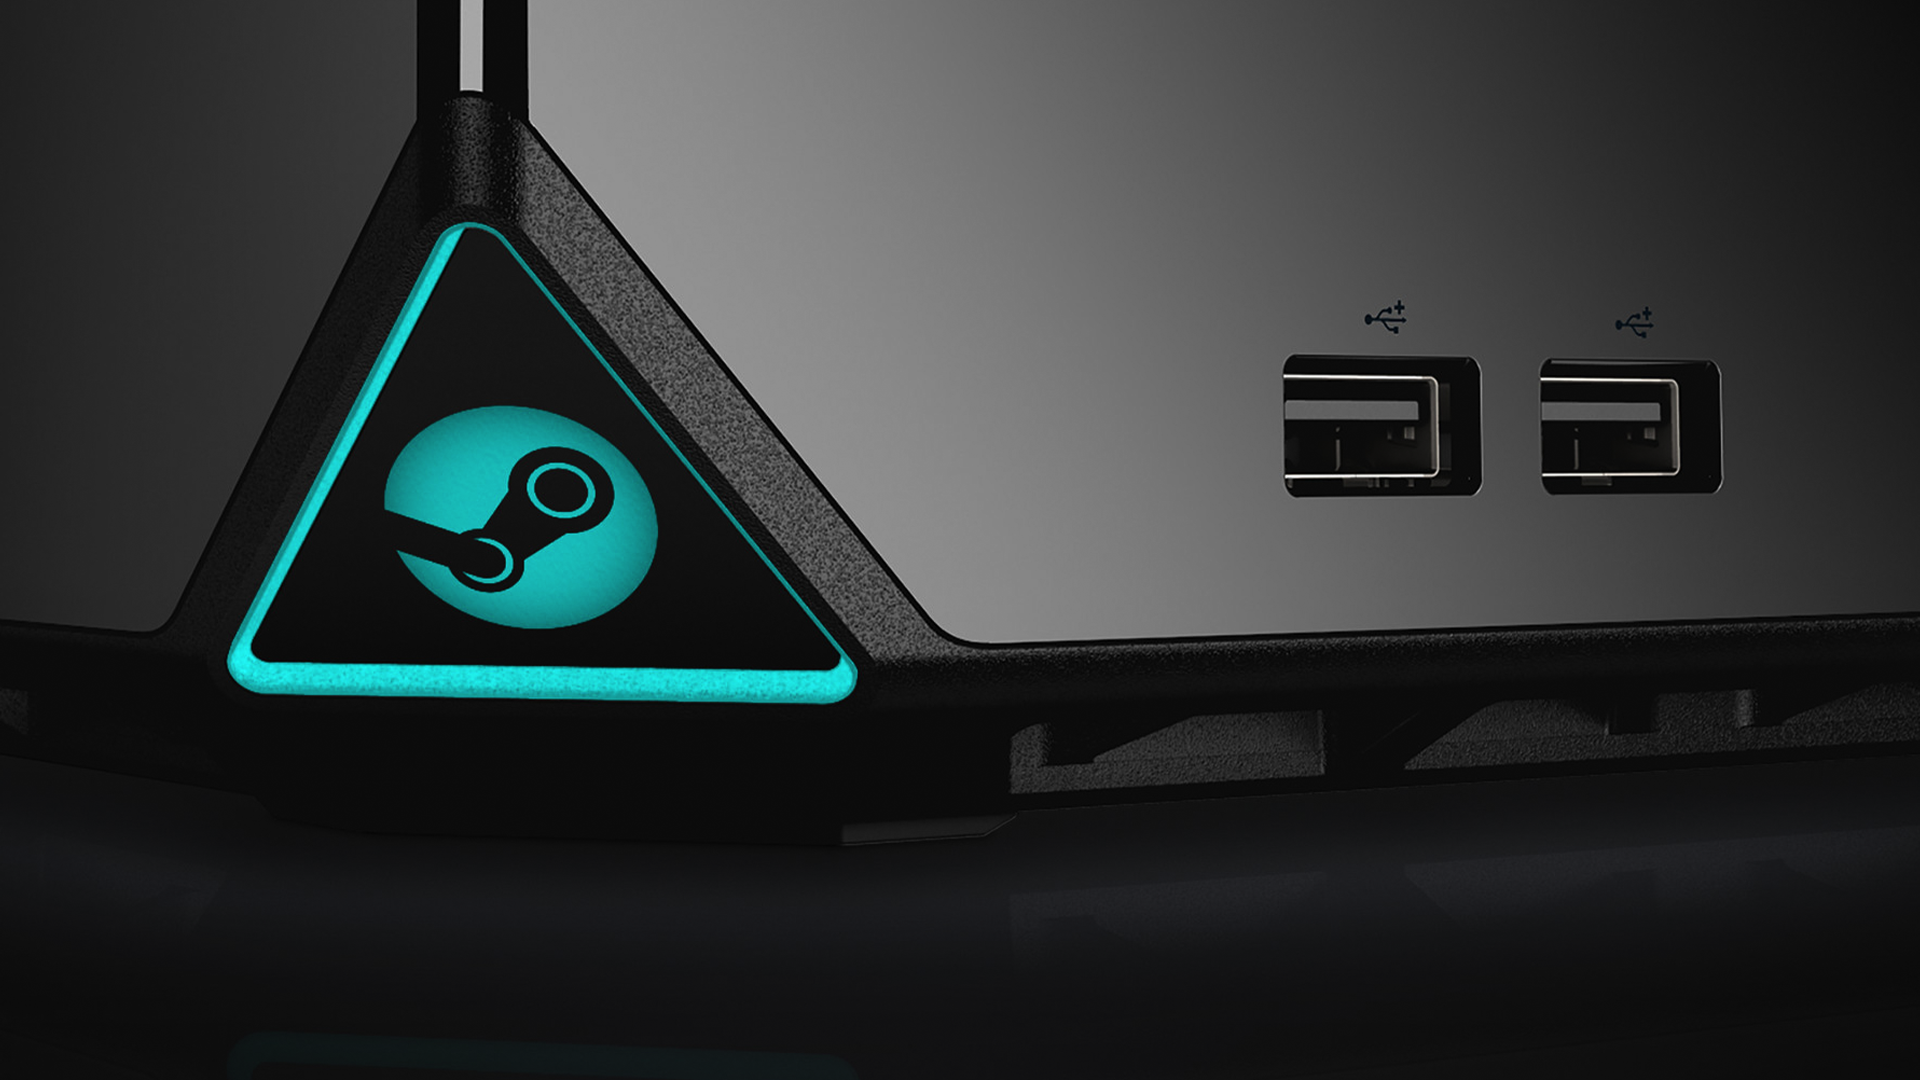 Steam Machines Could Return as Valve Prepares SteamOS for PCs